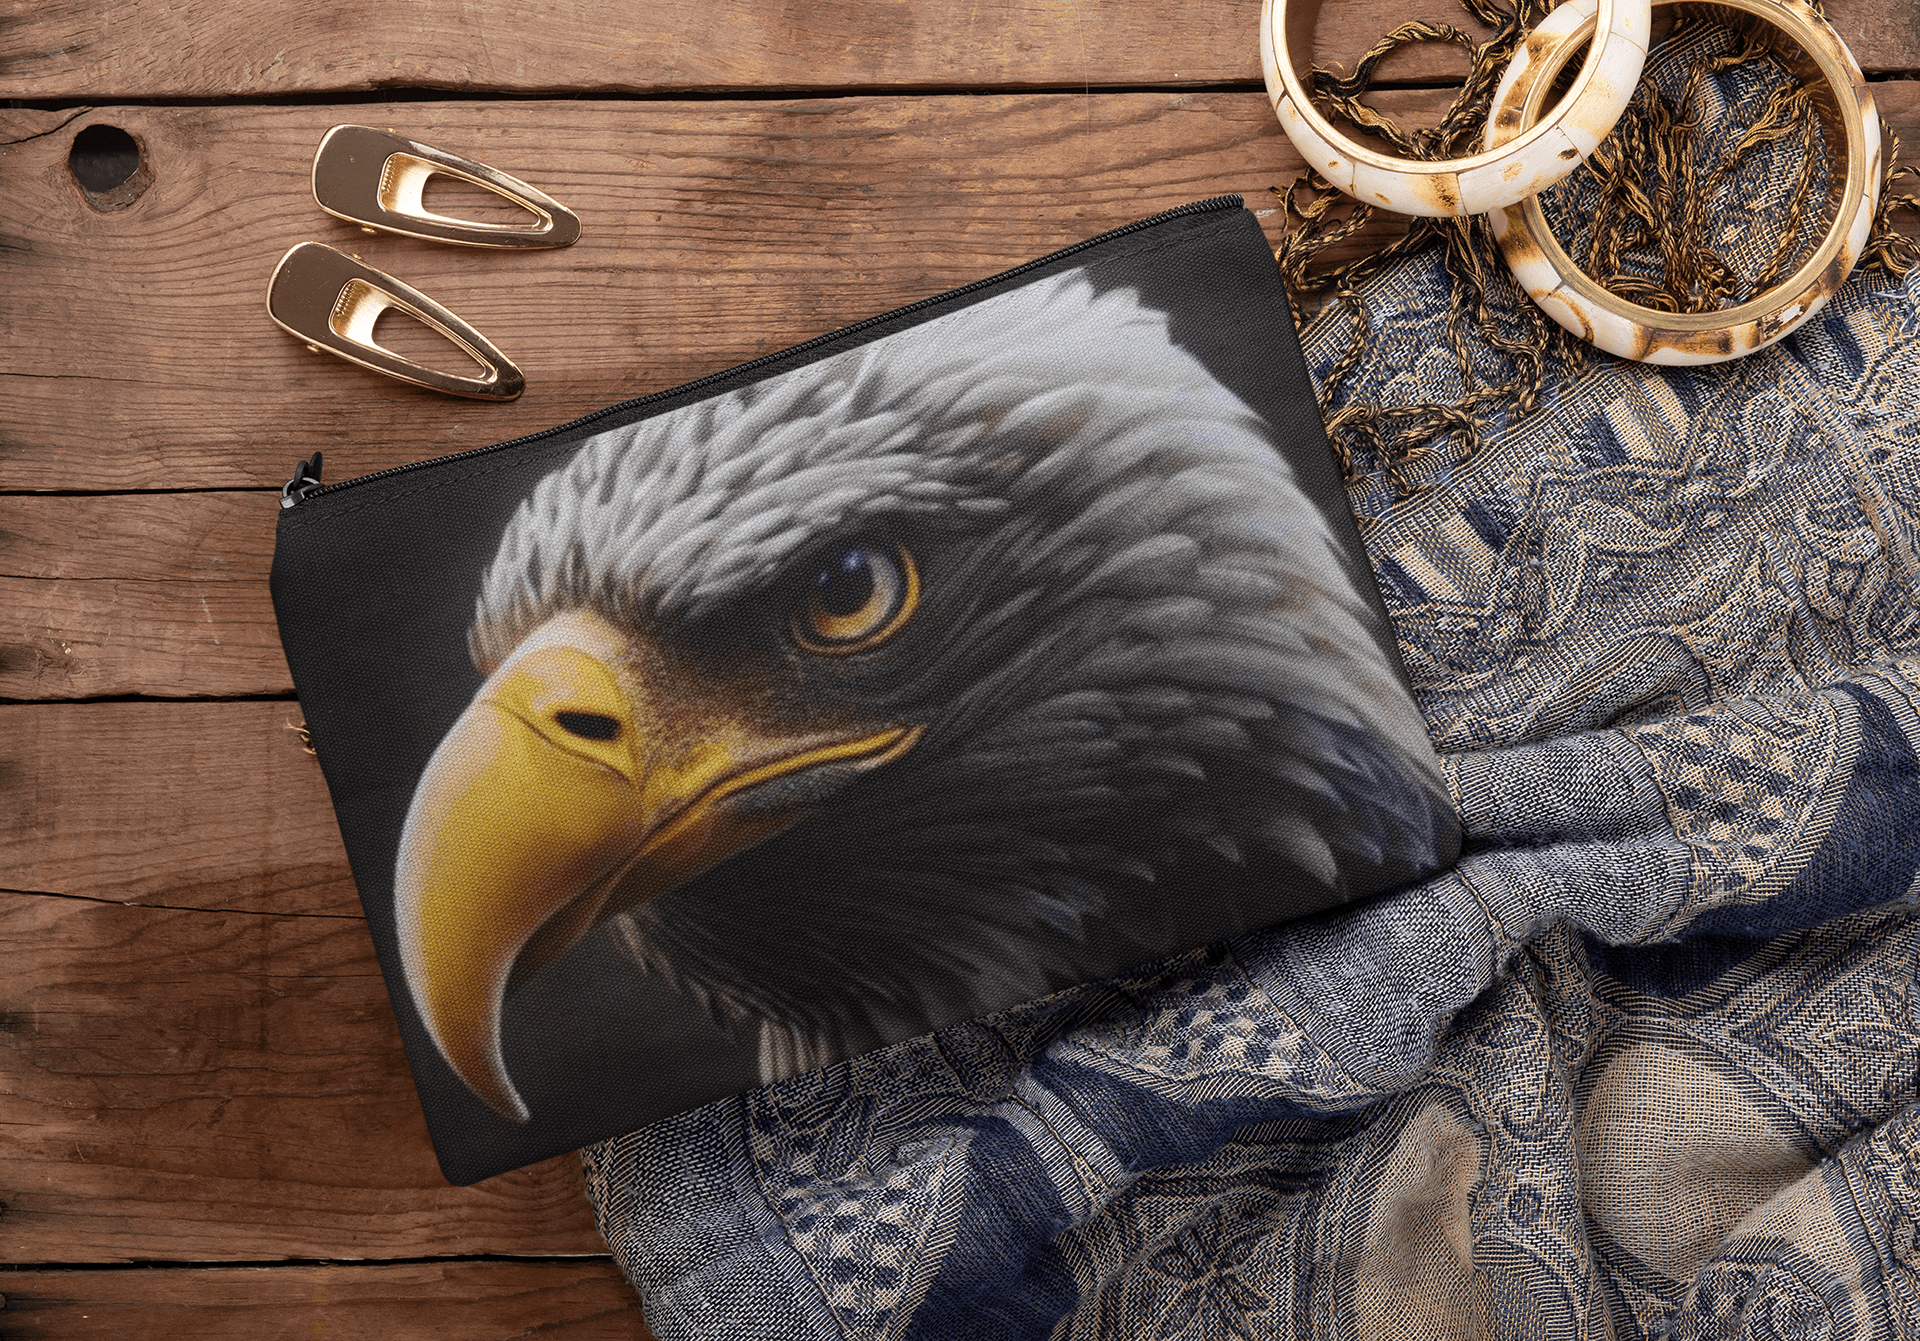 Eagle Makeup Bag - Trendy Cosmetic Bag - Cool Makeup Pouch - TWIN DOLLAR